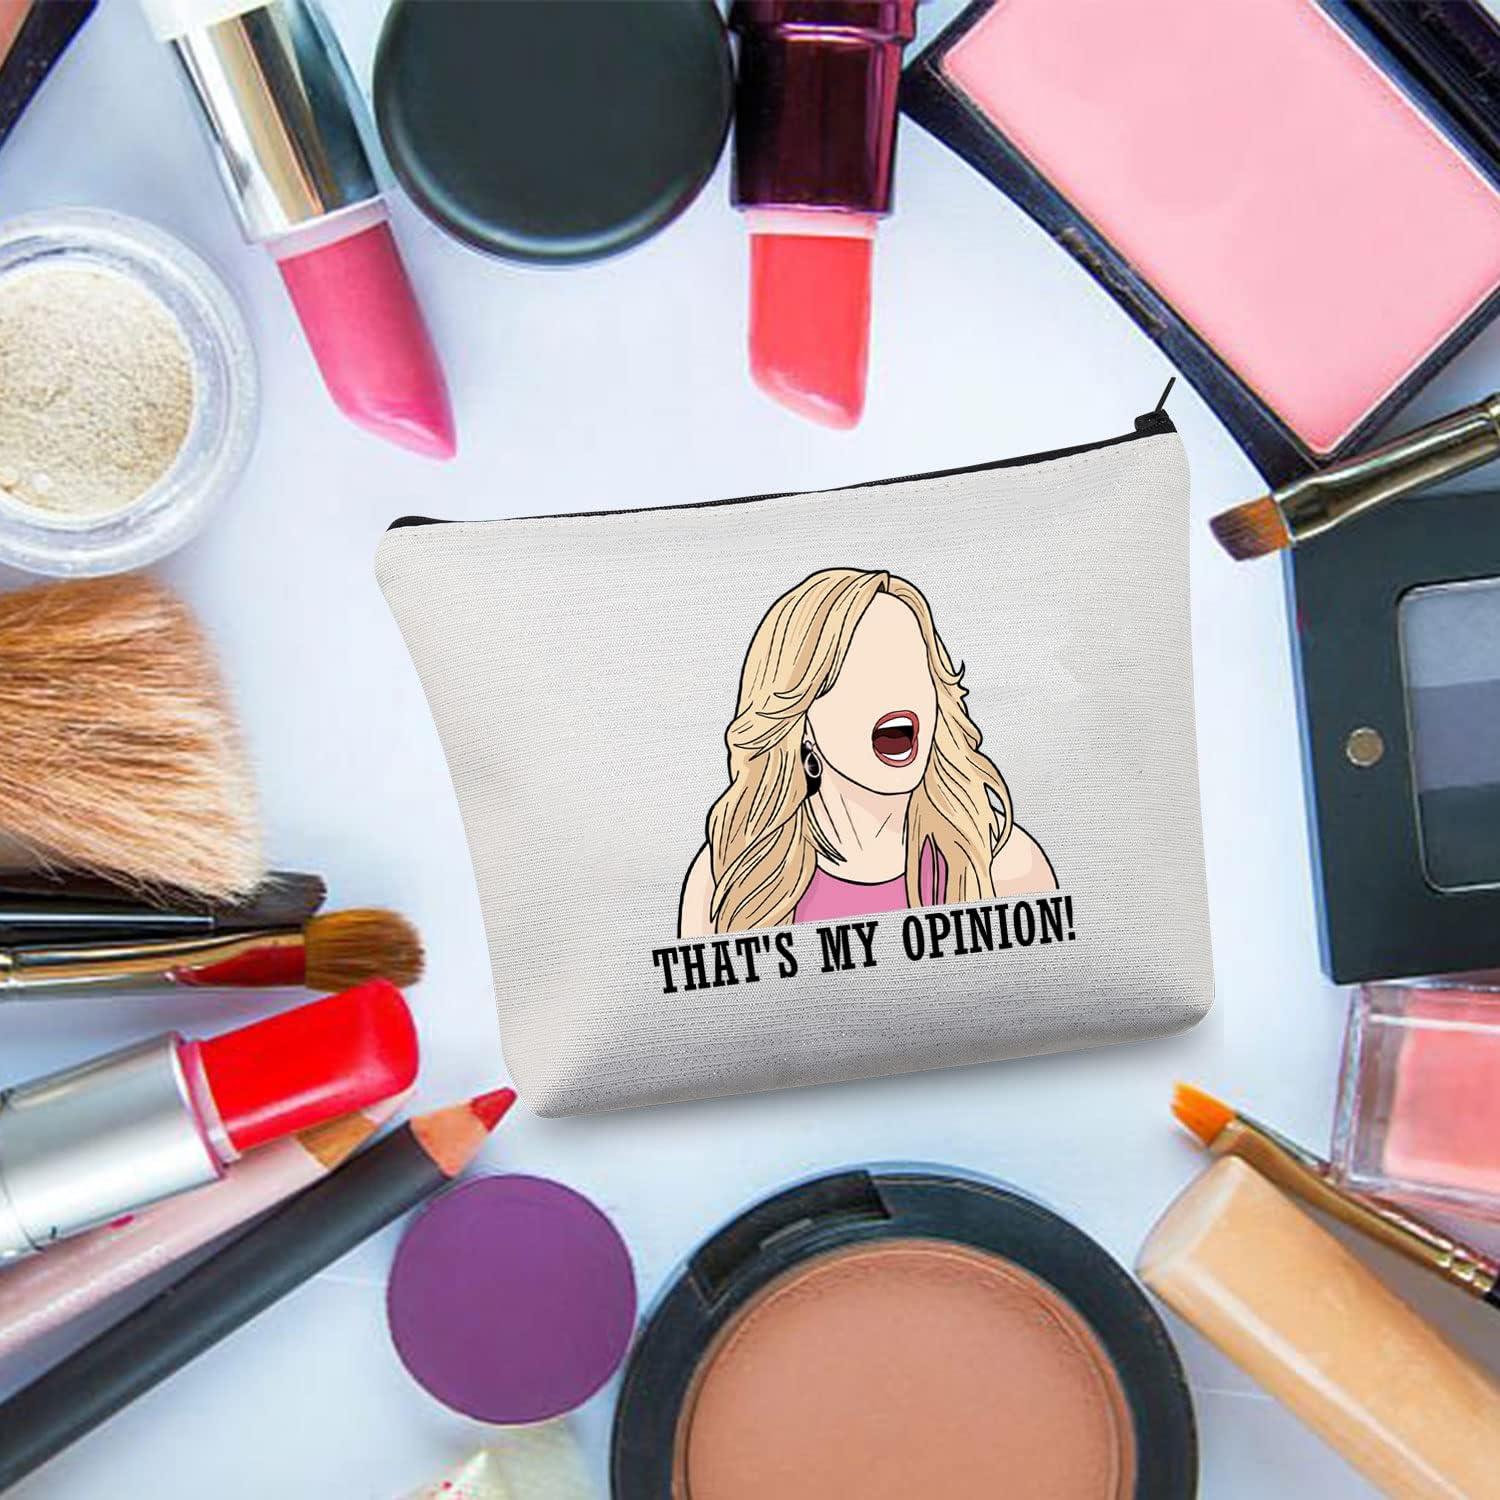 A "That's My Opinion" makeup bag